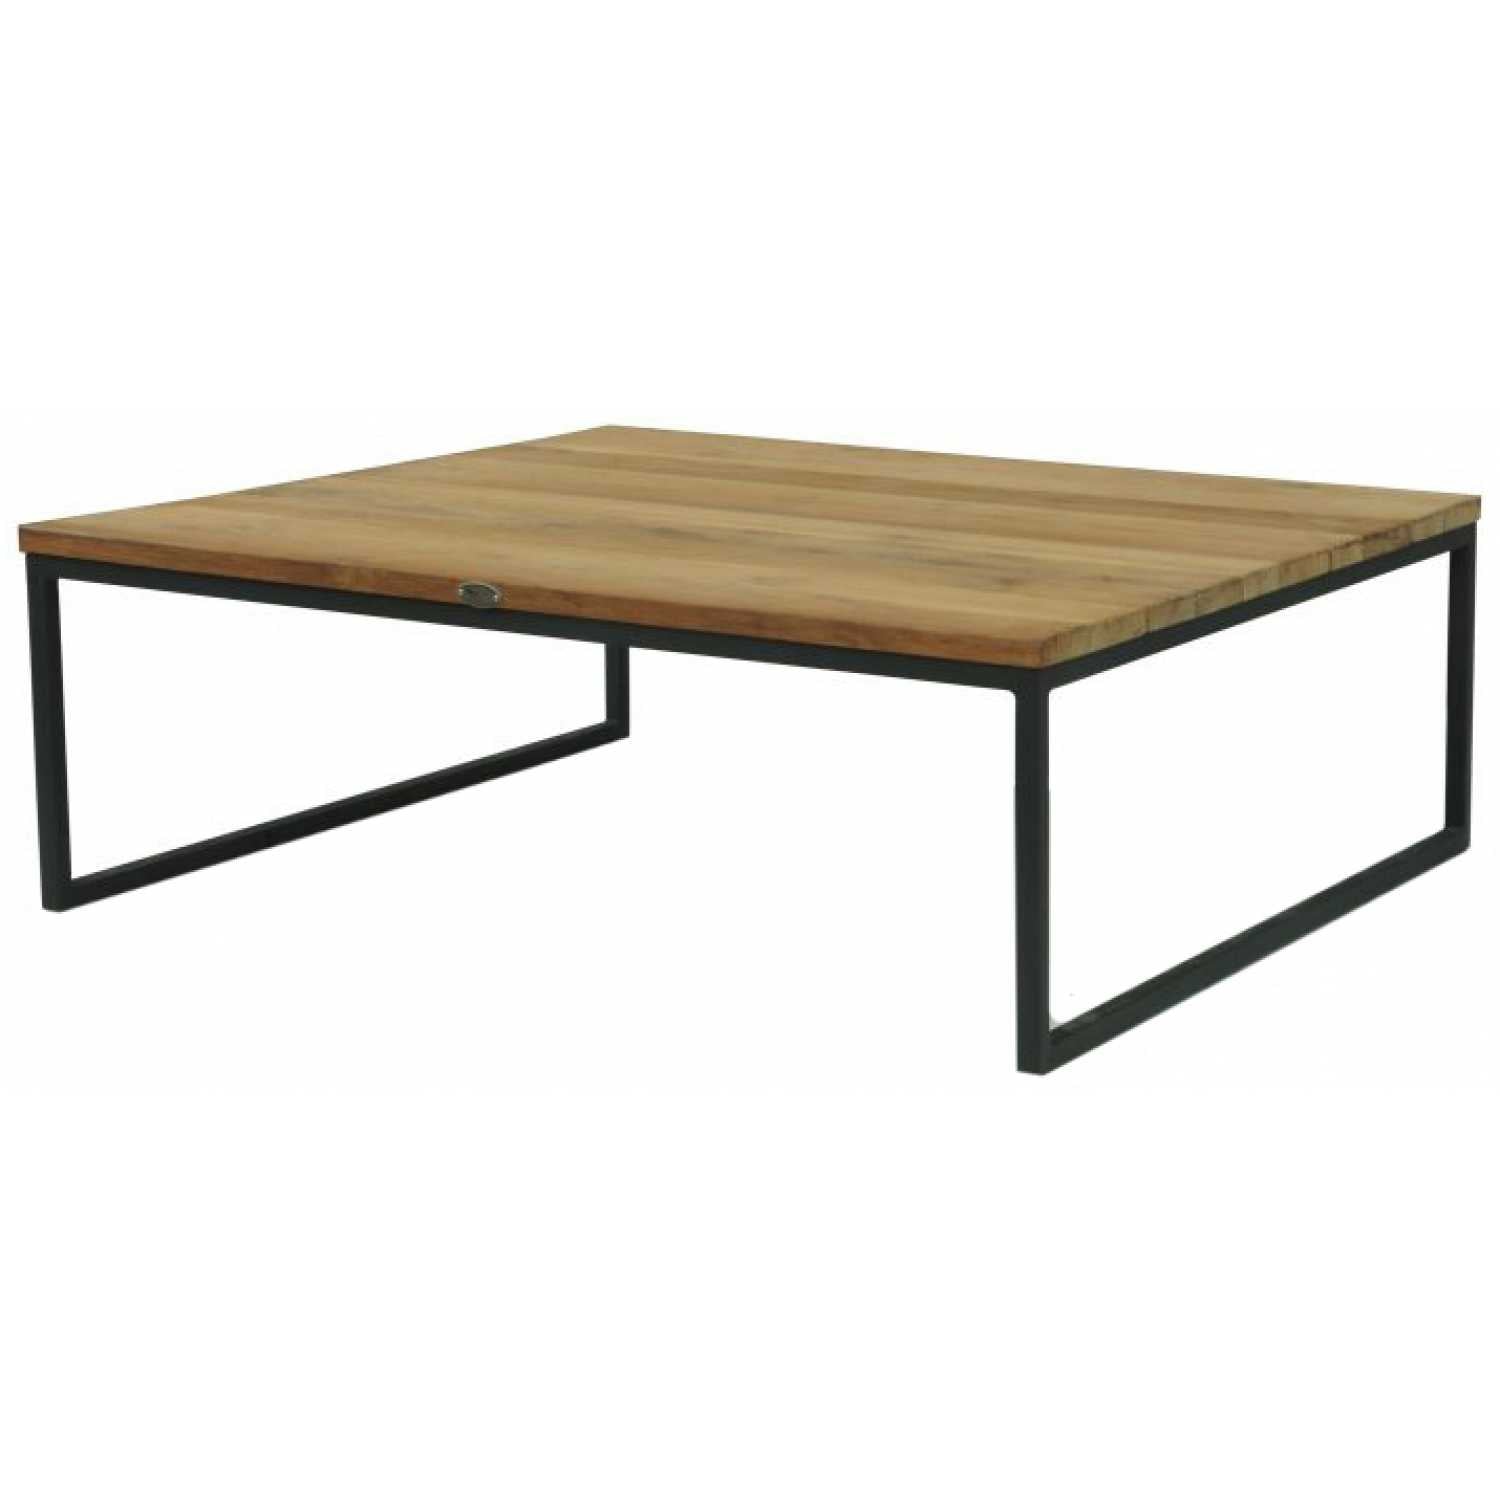 Nautic Coffee Table- Matte Carbon (Square or Rectangle) - PadioLiving - Nautic Coffee Table- Matte Carbon (Square or Rectangle) - Coffee Tables - Square Coffee Table - PadioLiving